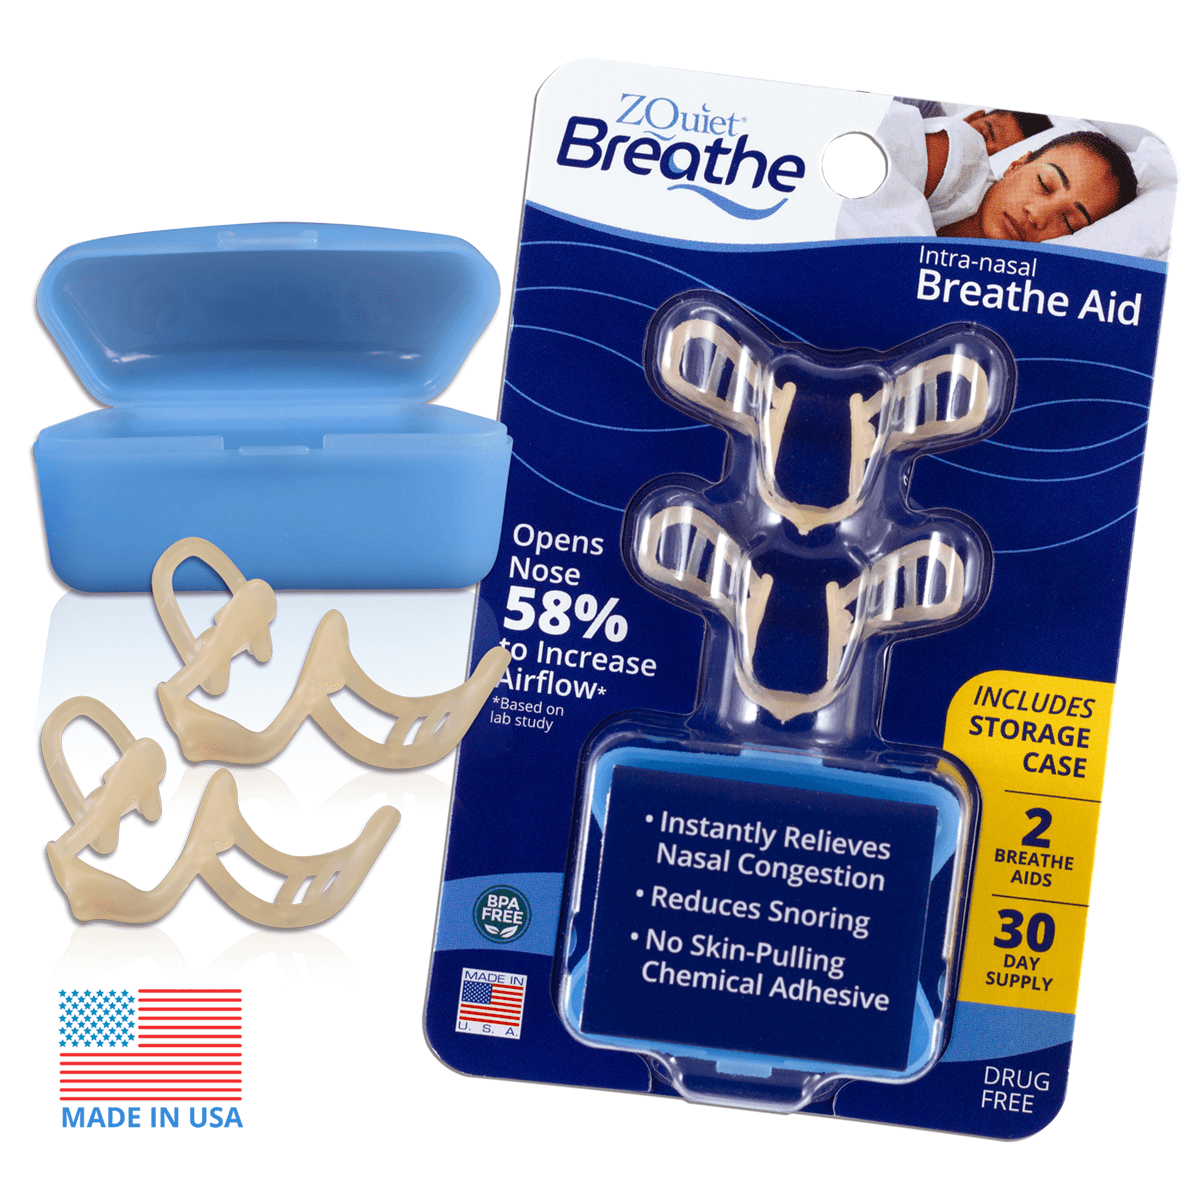 ZQuiet breathe aid complete product image with made in usa logo